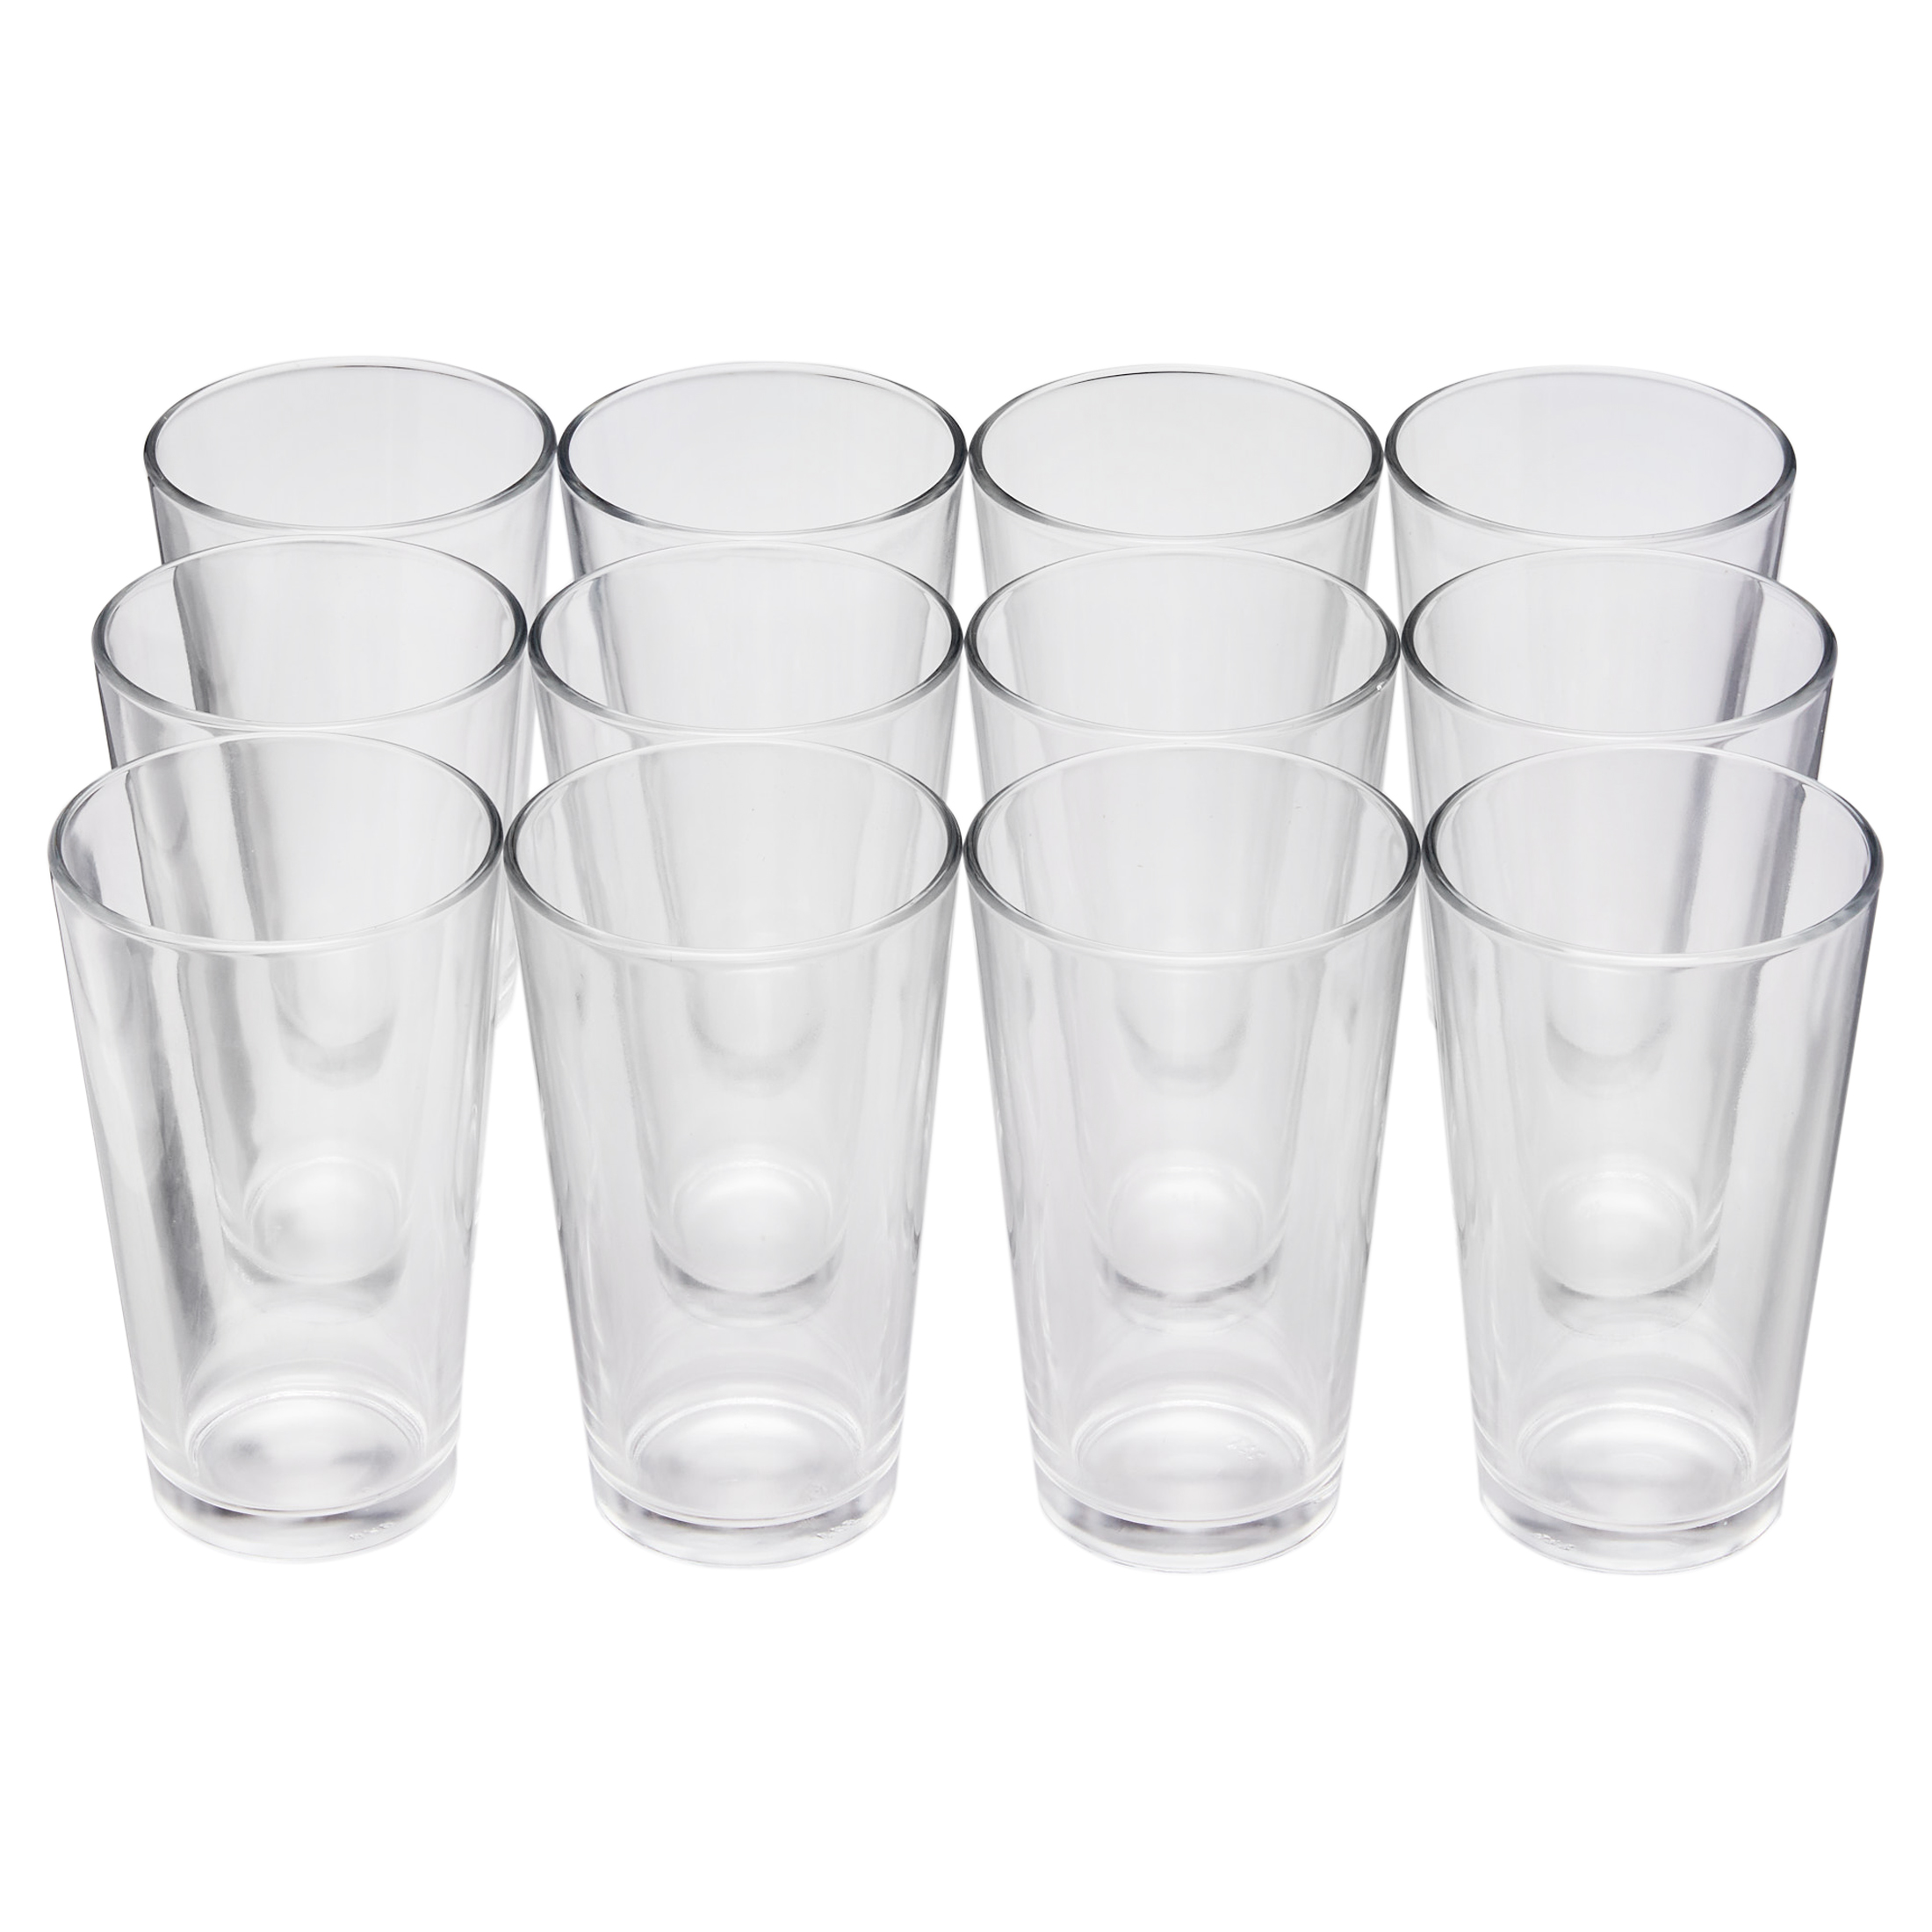 Luminarc 16 oz. Clear Glass Coolers 12 PC Set - image 4 of 6